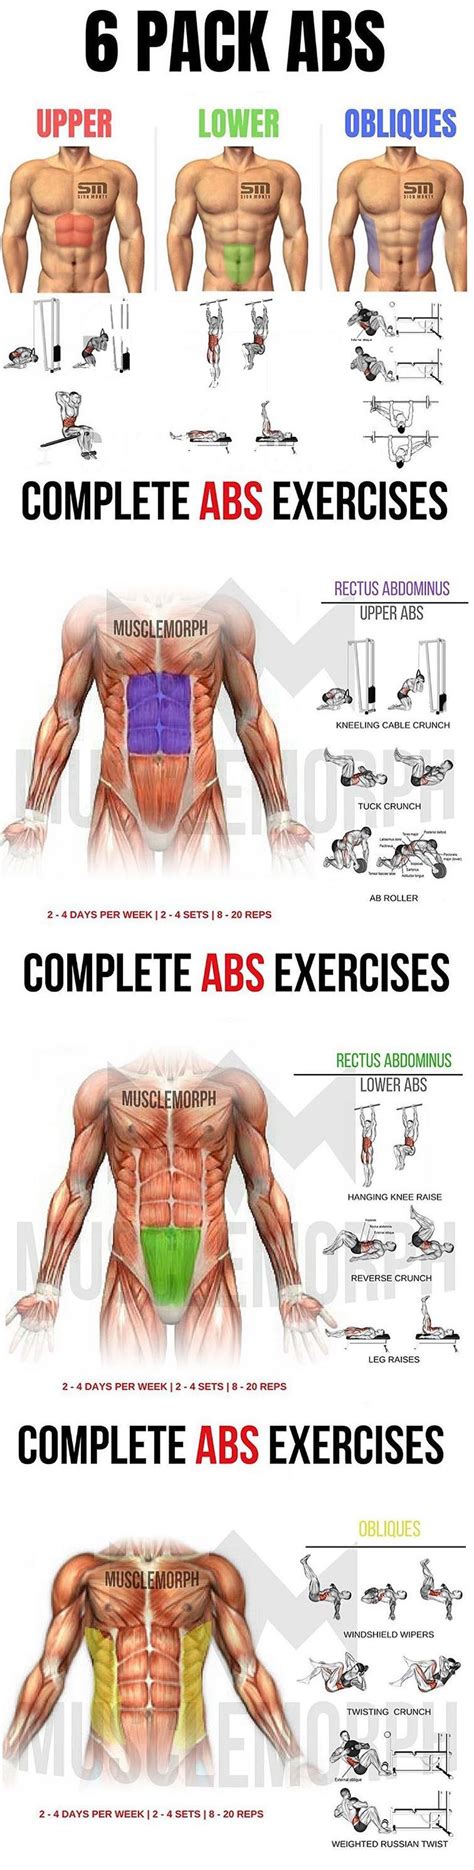 Pack Abs Abs Workout Abs Workout Routines Workout Routine